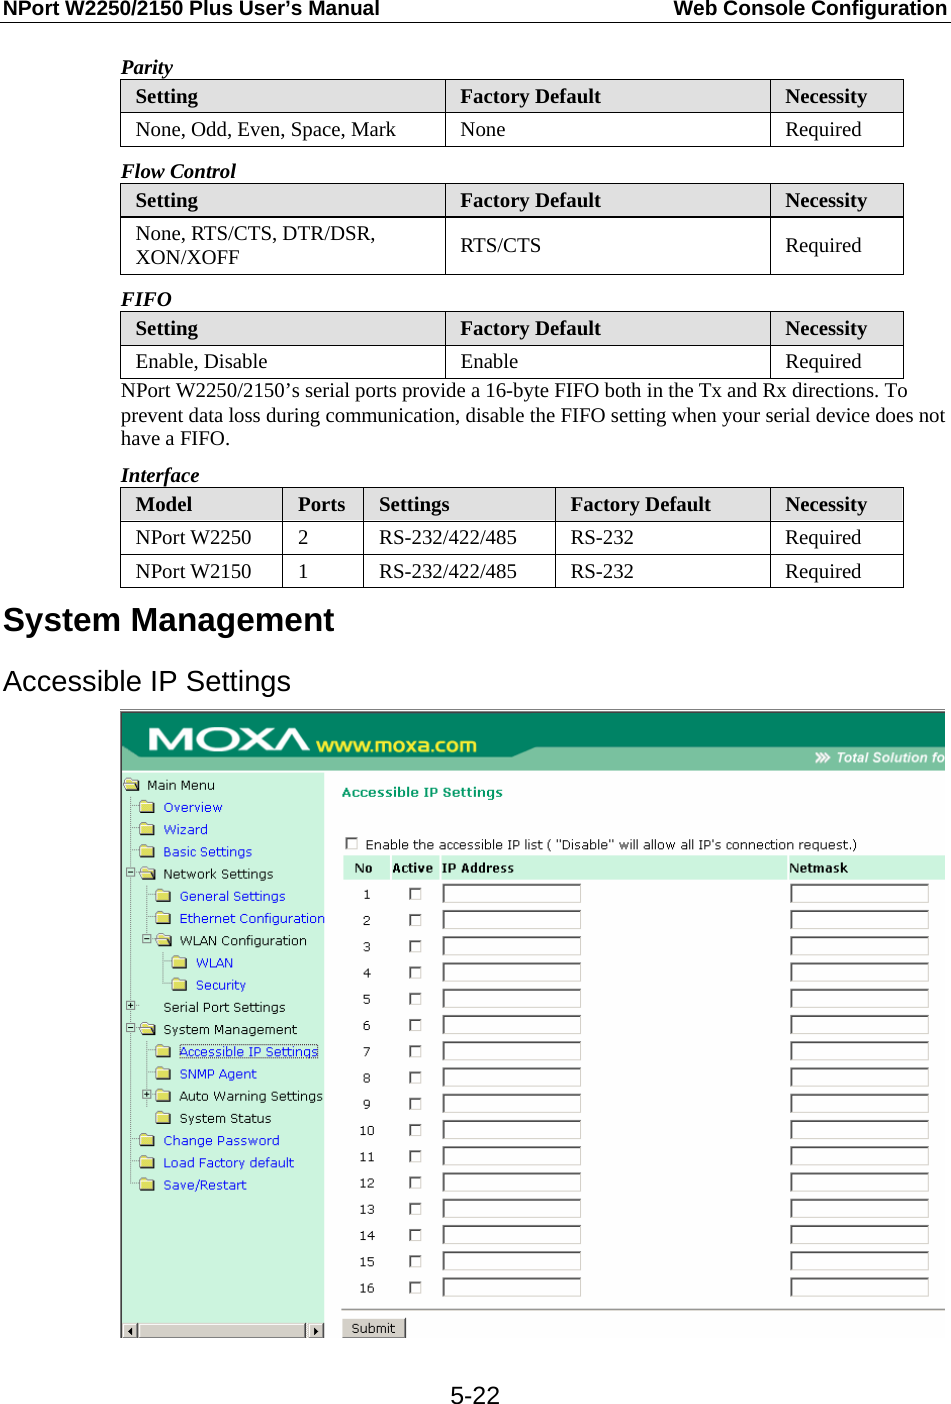 NPort W2250/2150 Plus User’s Manual  Web Console Configuration  5-22Parity Setting  Factory Default  Necessity None, Odd, Even, Space, Mark  None  Required Flow Control Setting  Factory Default  Necessity None, RTS/CTS, DTR/DSR, XON/XOFF  RTS/CTS Required FIFO Setting  Factory Default  Necessity Enable, Disable  Enable  Required NPort W2250/2150’s serial ports provide a 16-byte FIFO both in the Tx and Rx directions. To prevent data loss during communication, disable the FIFO setting when your serial device does not have a FIFO. Interface Model  Ports  Settings  Factory Default  Necessity NPort W2250  2  RS-232/422/485  RS-232  Required NPort W2150  1  RS-232/422/485  RS-232  Required System Management Accessible IP Settings  